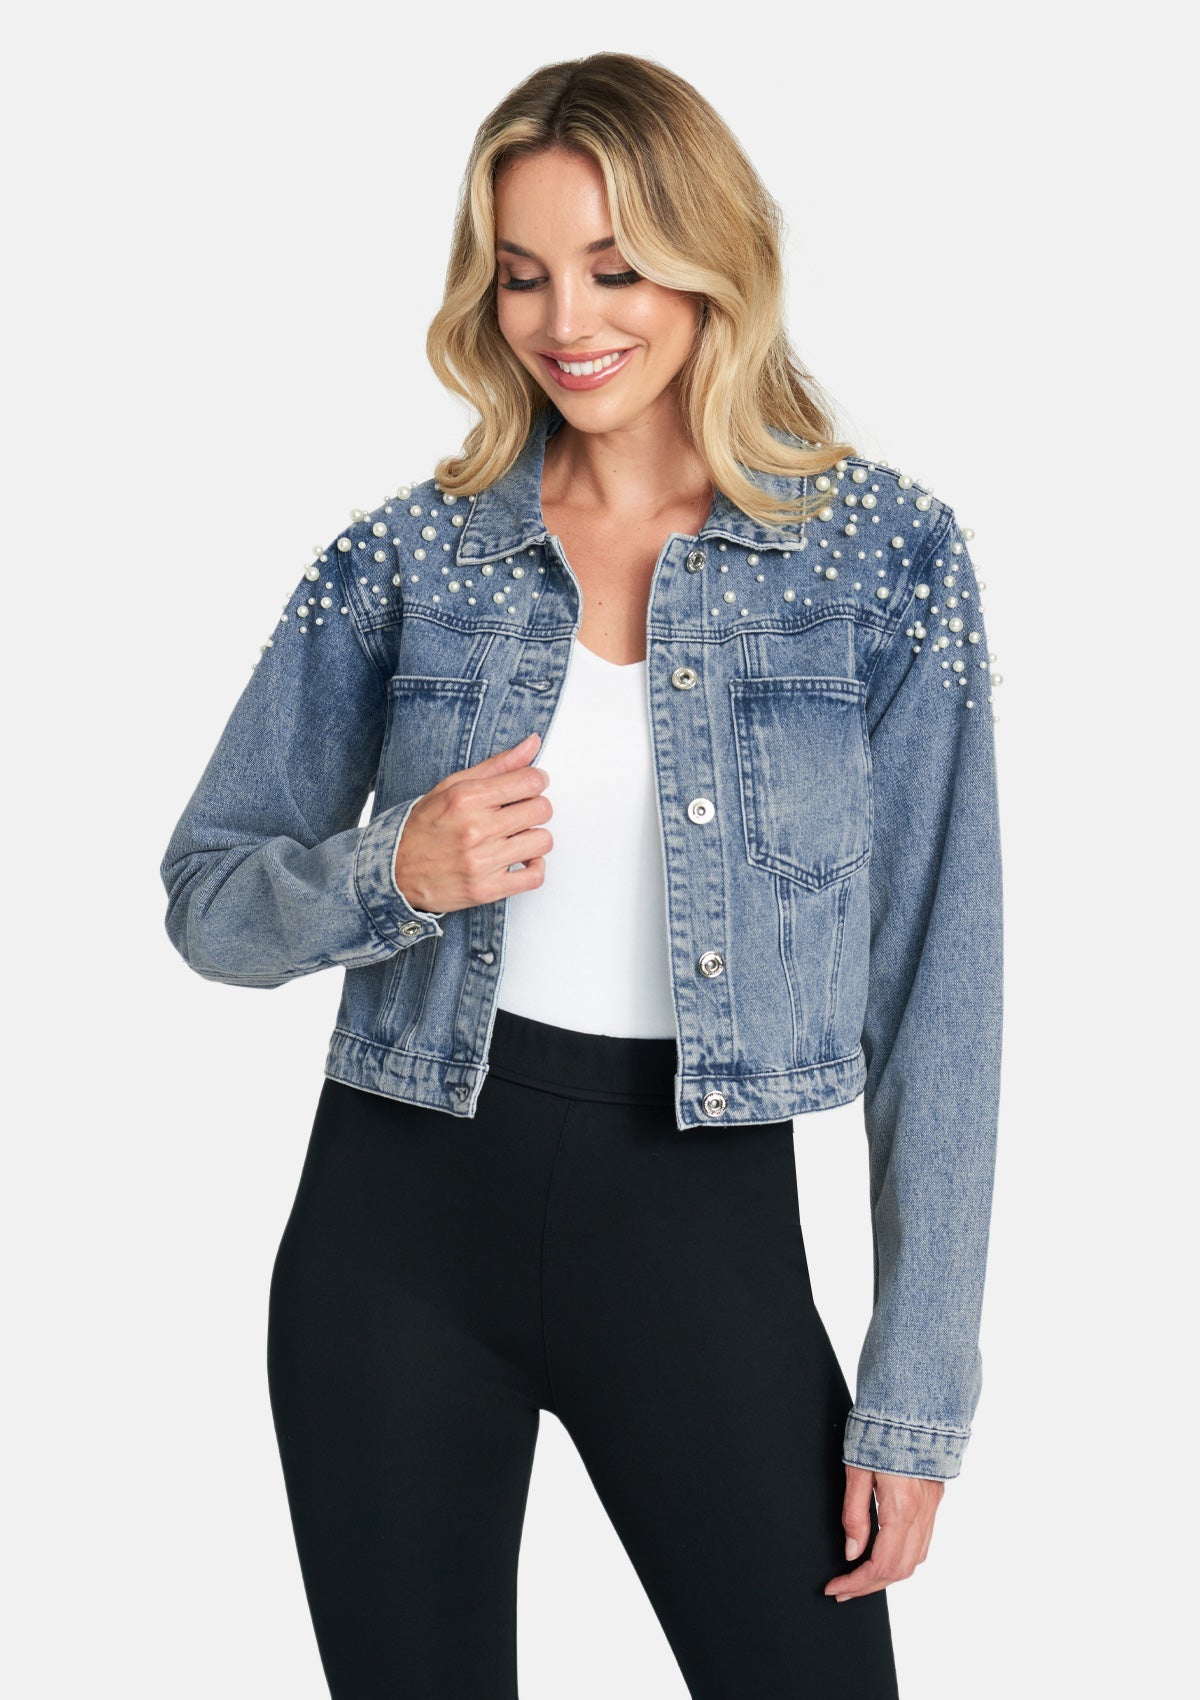 Black Denim Jacket Outfits For Women (24 ideas & outfits) | Lookastic